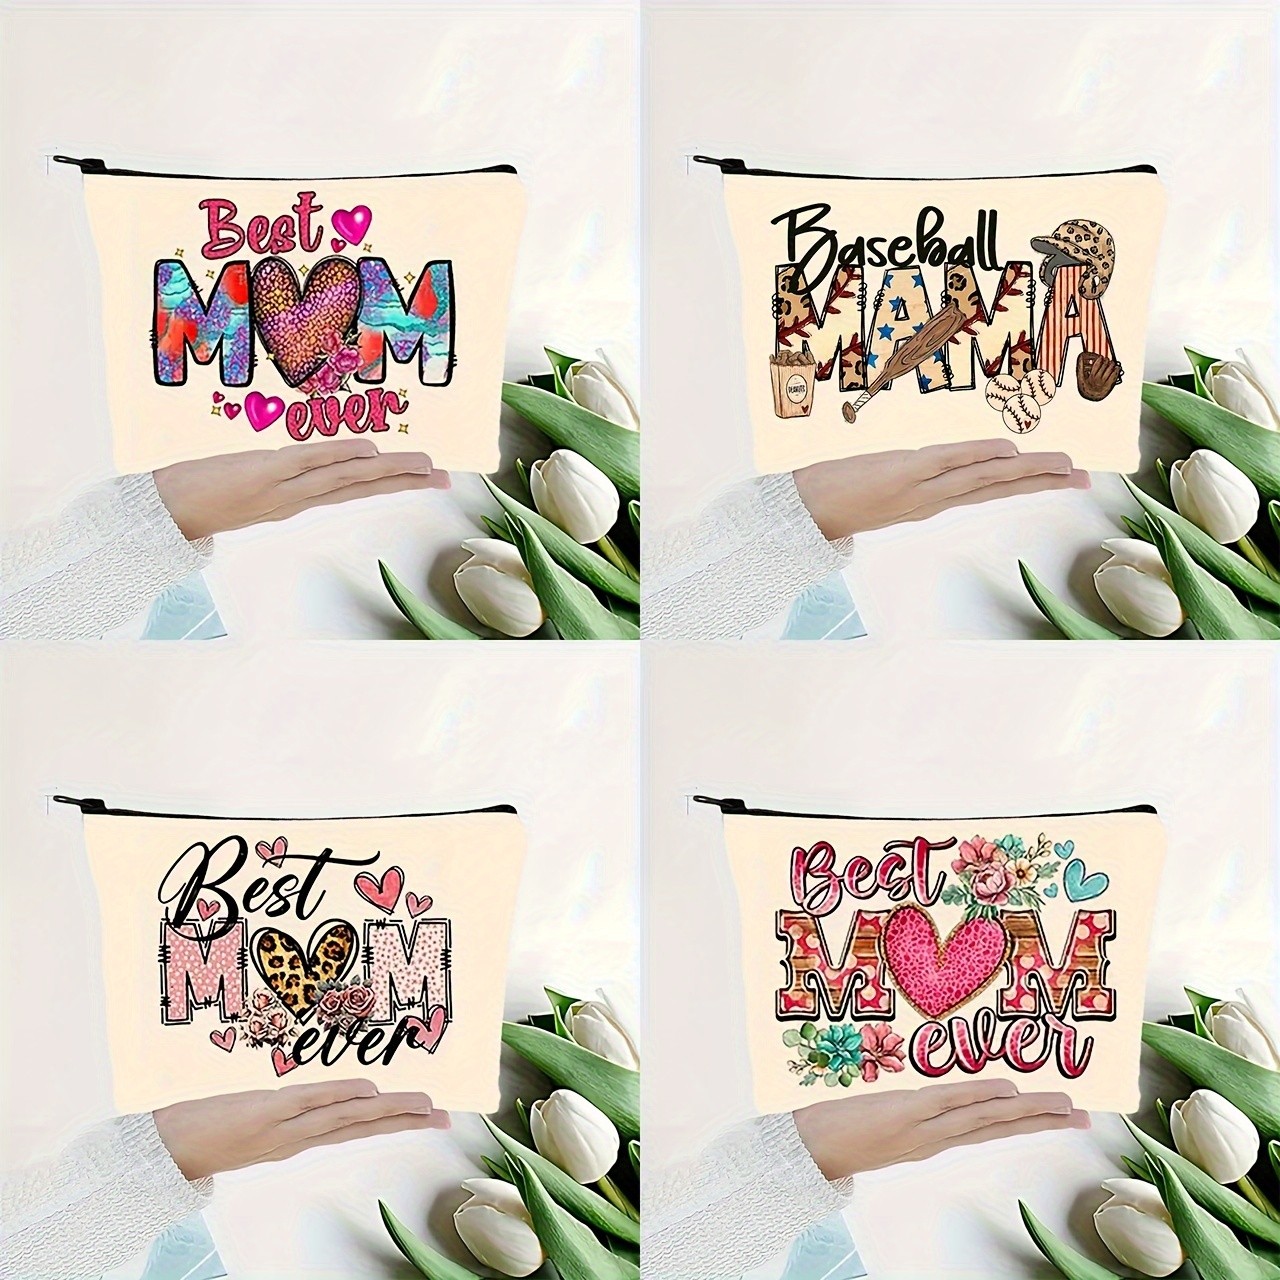 

Cosmetic Pouch For Mom, 1pc Multi-functional Makeup Bag With "best Mom Ever" & Baseball Theme Design, Durable Zippered Travel Toiletry Organizer, Perfect Mother's Day & Birthday Gift